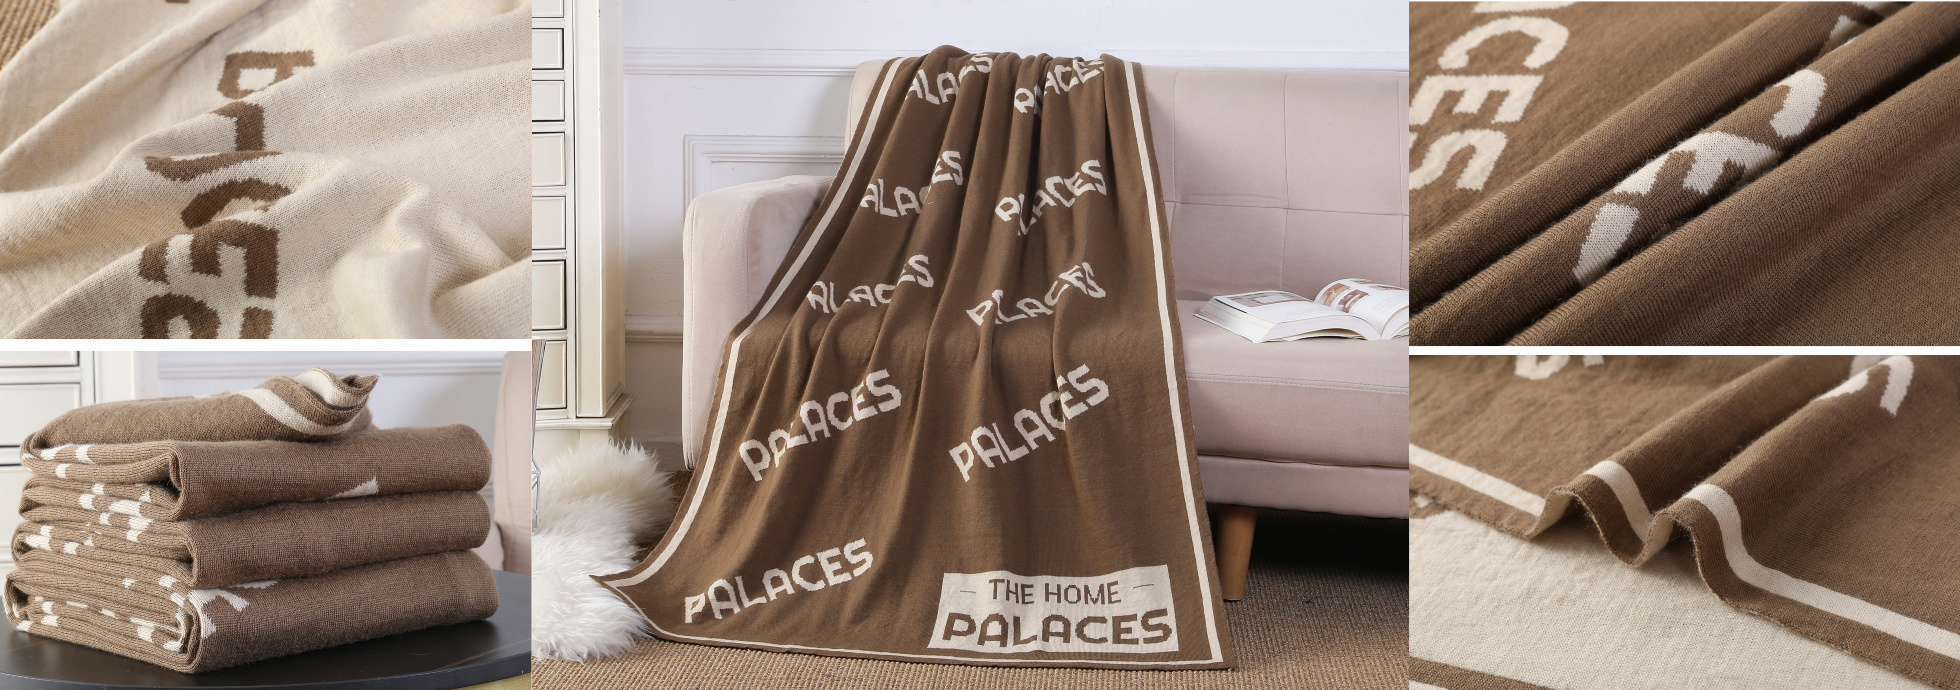 Dual Face Dual Color Cashmere Knitted Blanket Bring You The Ultimate Feeling